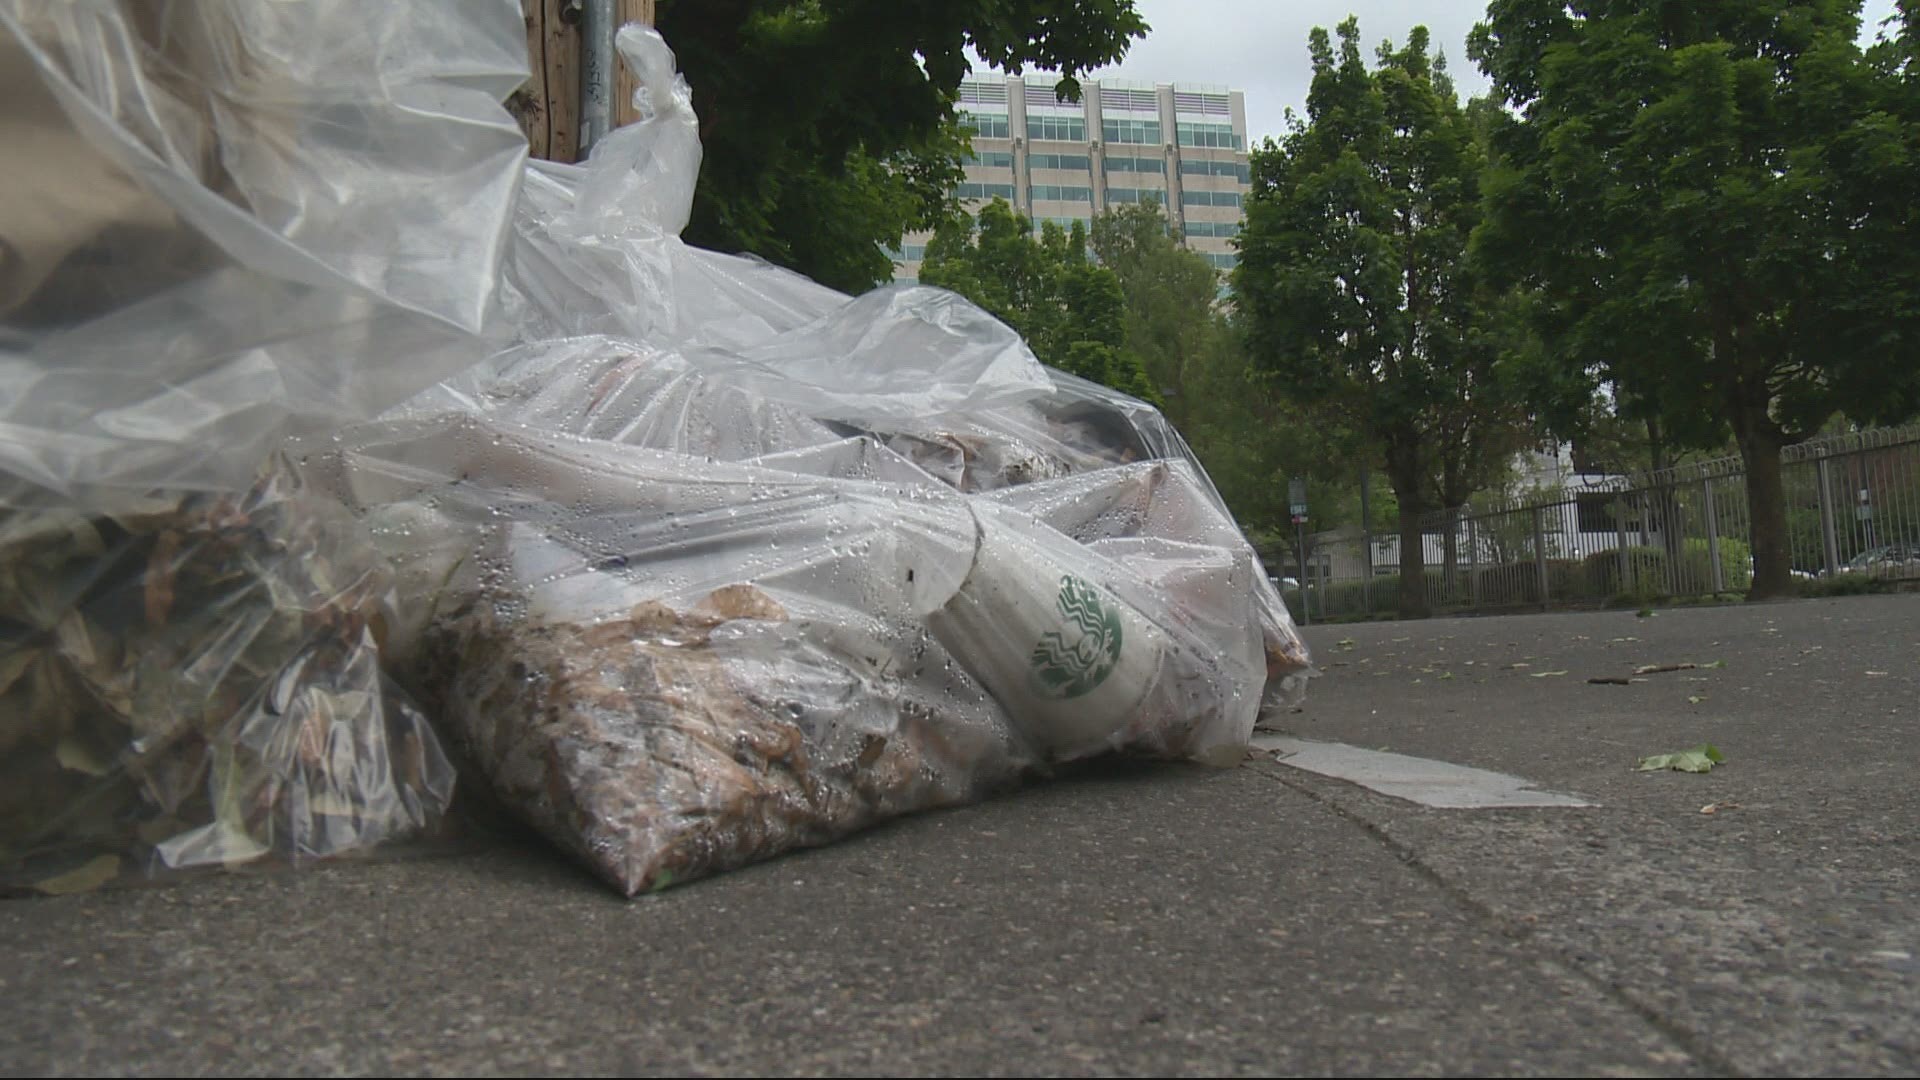 Portland leaders are push efforts to clean up the trash that’s piled up over the last 15 months. Pat Dooris explains how you can help.